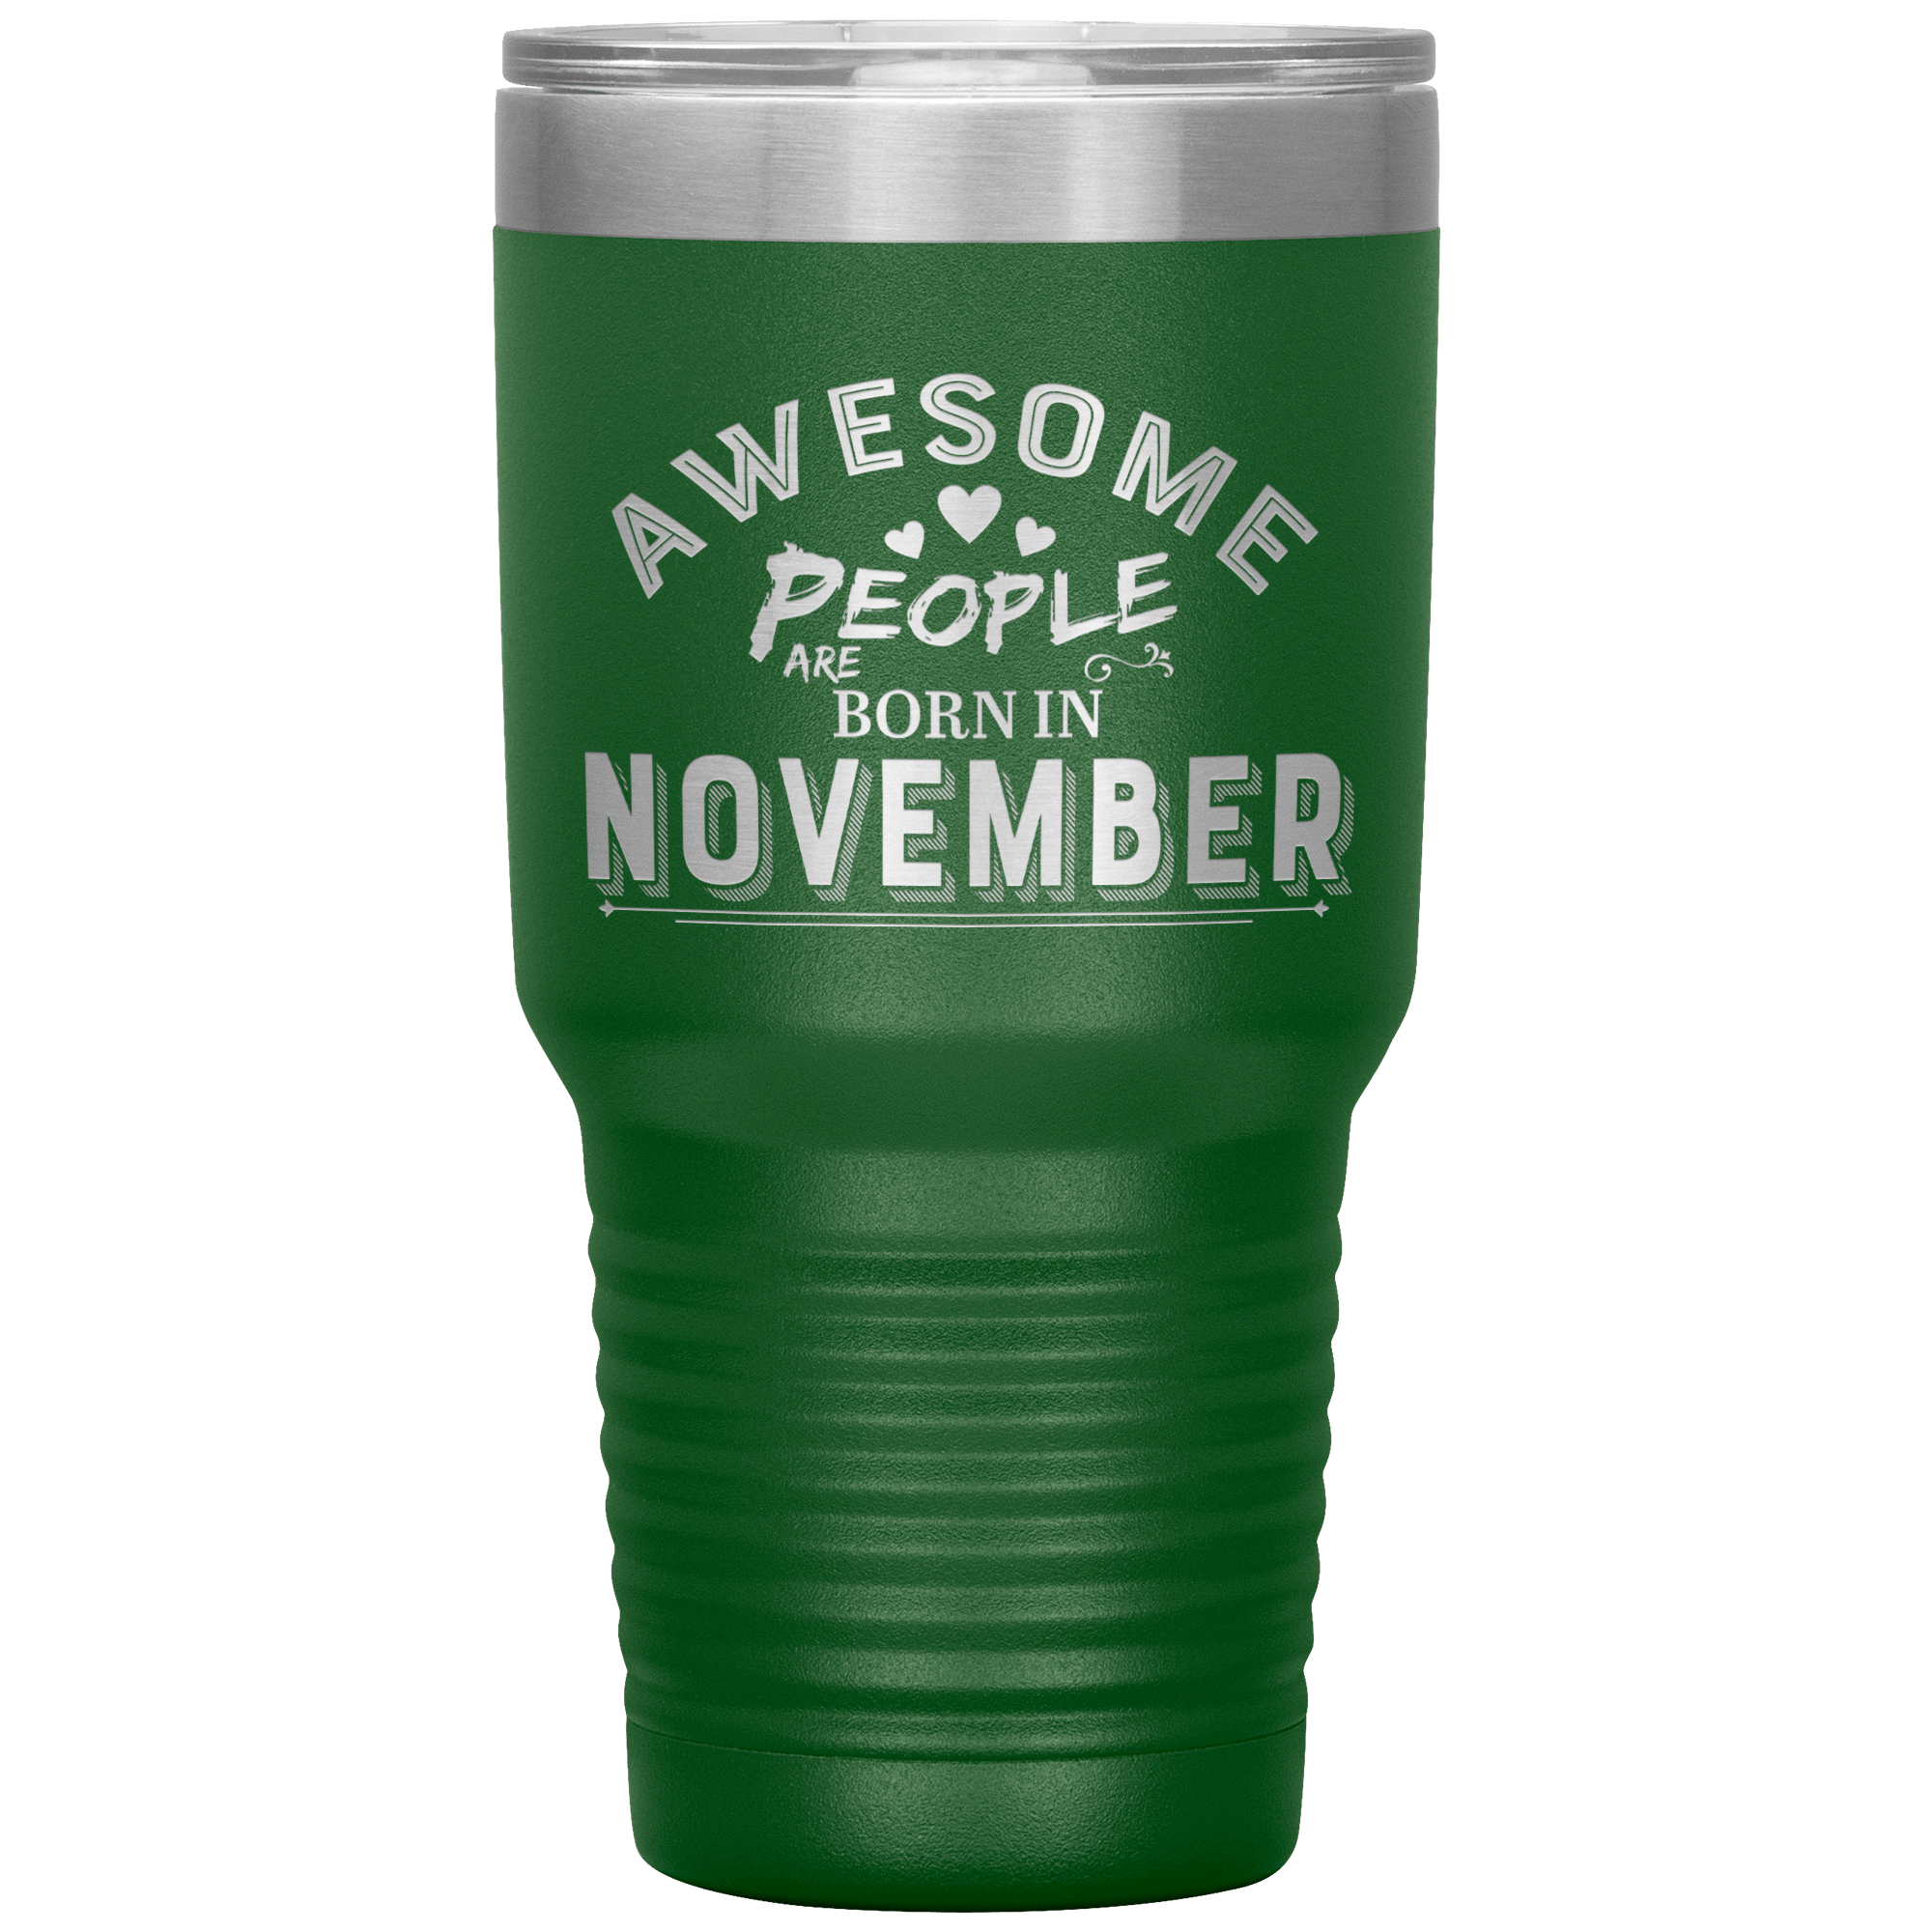 "AWESOME PEOPLE ARE BORN IN NOVEMBER" Tumbler